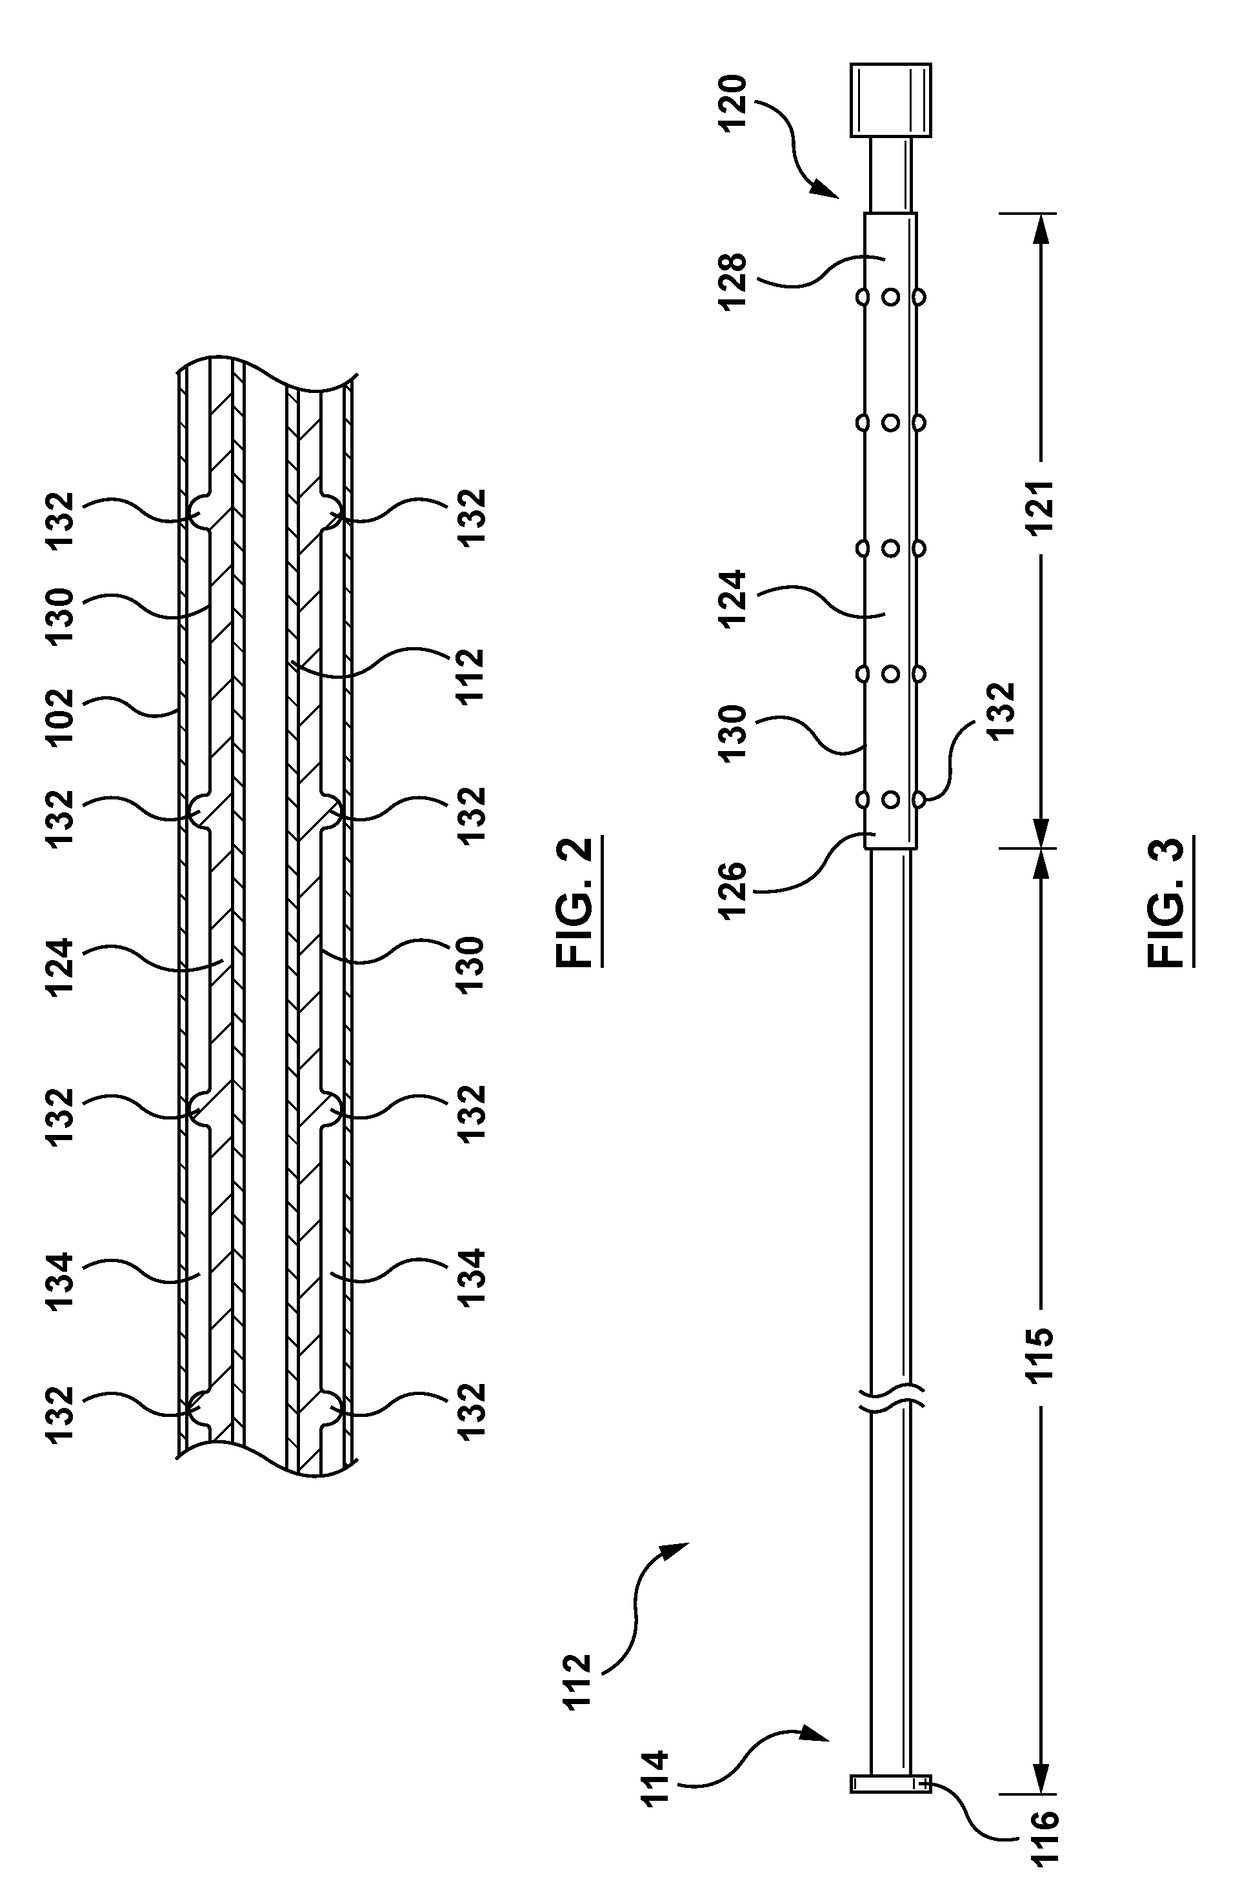 Stent-graft delivery system having an inner shaft component with a loading pad or covering on a distal segment thereof for stent retention